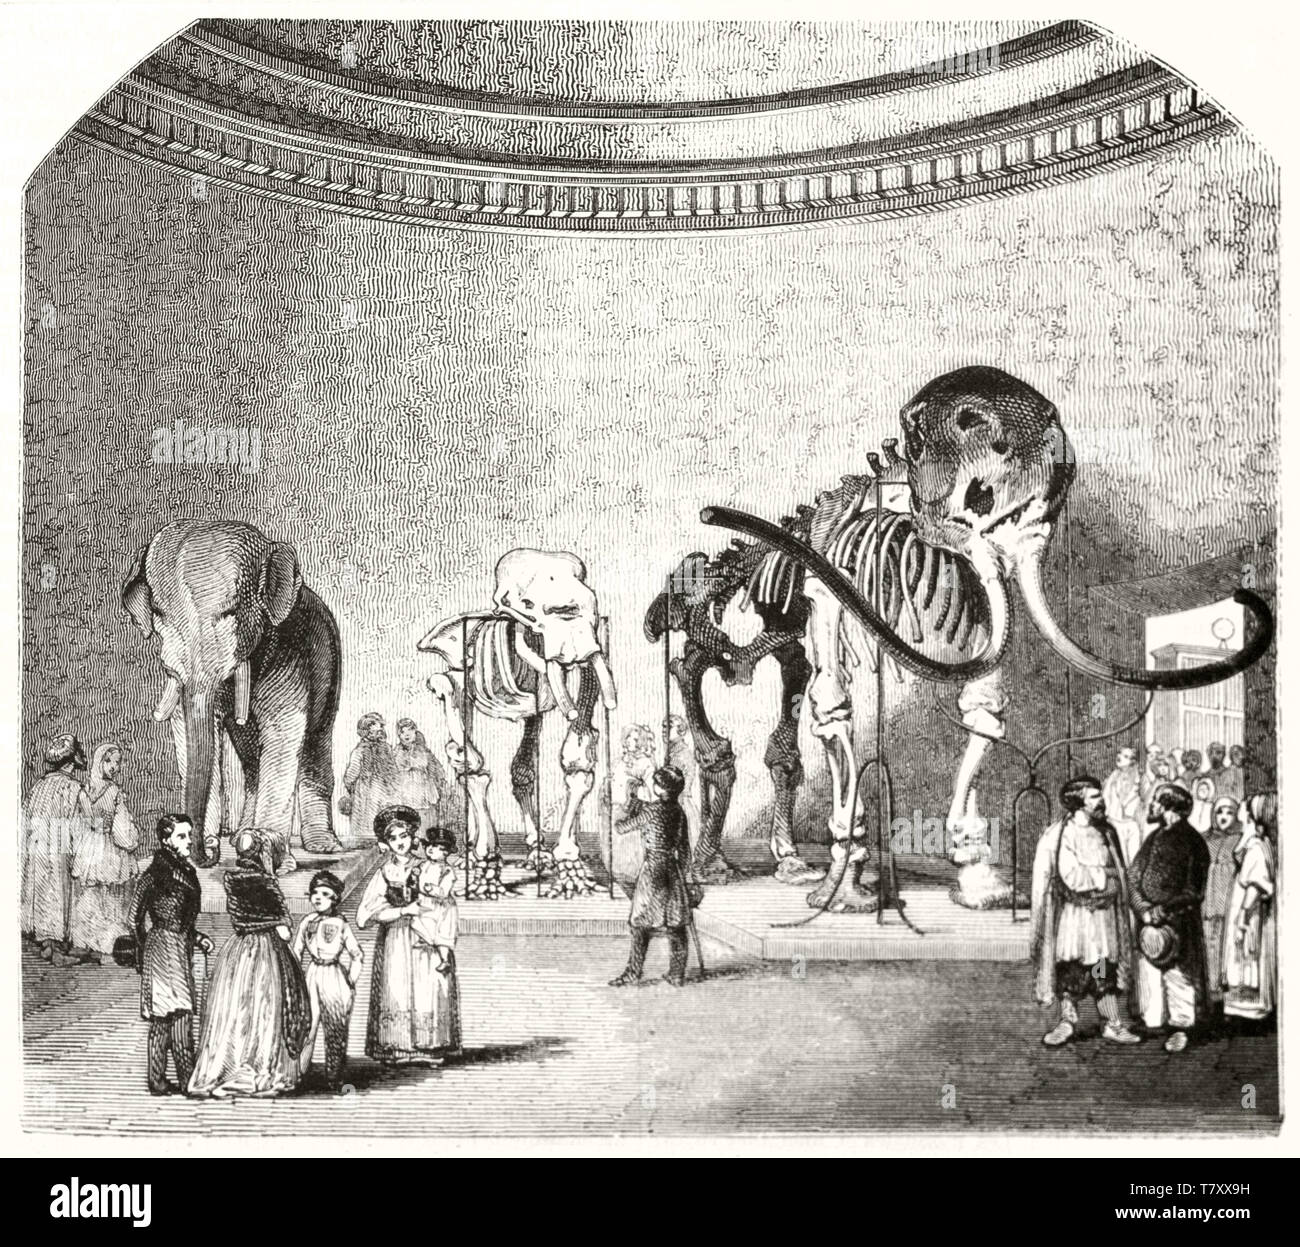 Part of a big hall in the Sciences Academy Saint Petersburg Russia. People admires mammoth skeletons. Grayscale illustration by unidentified author publ. on Magasin Pittoresque Paris 1848 Stock Photo